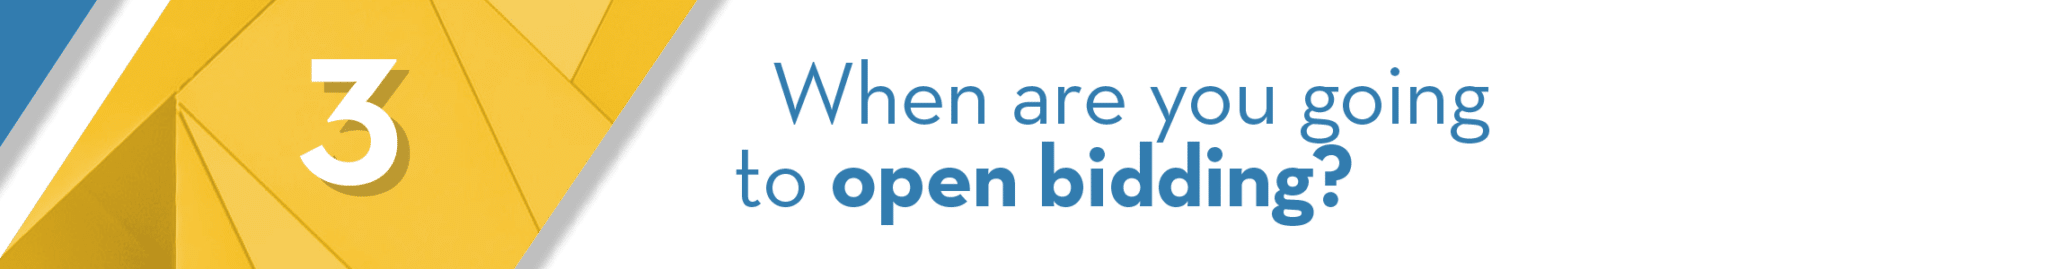 3-when-are-you-going-to-open-bidding